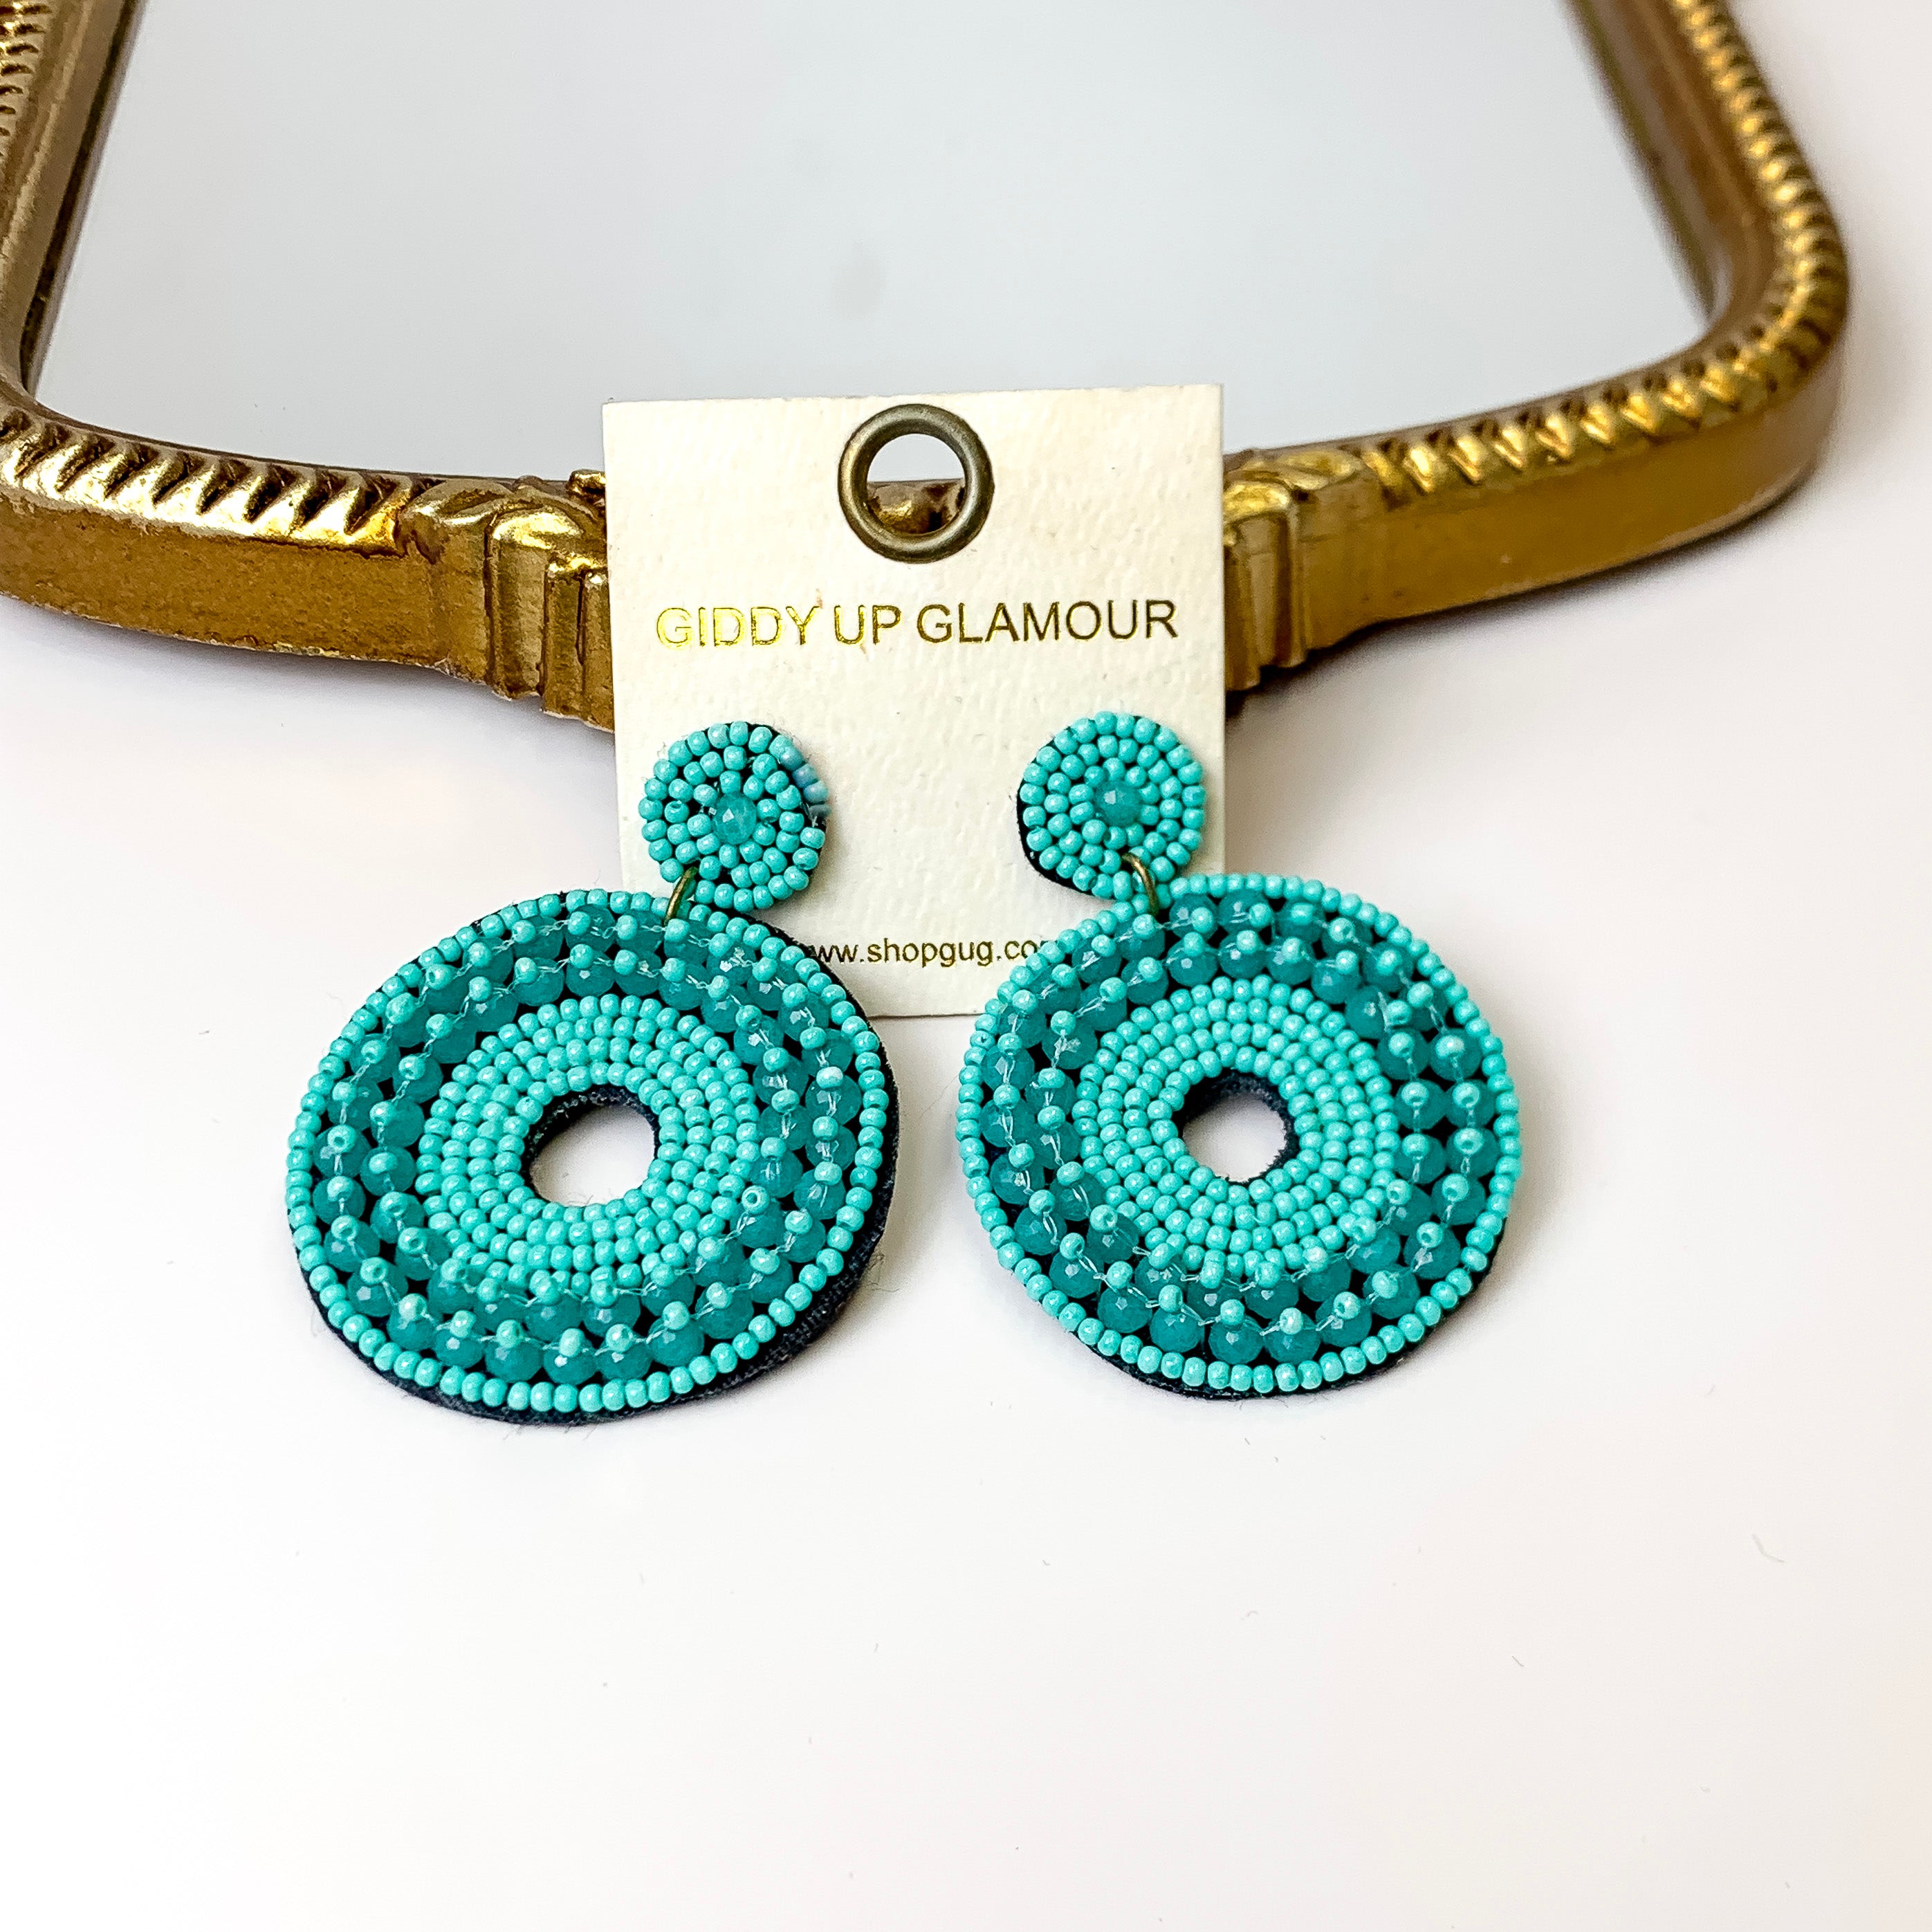 Seed Bead Circle Drop Earrings in Teal Blue - Giddy Up Glamour Boutique